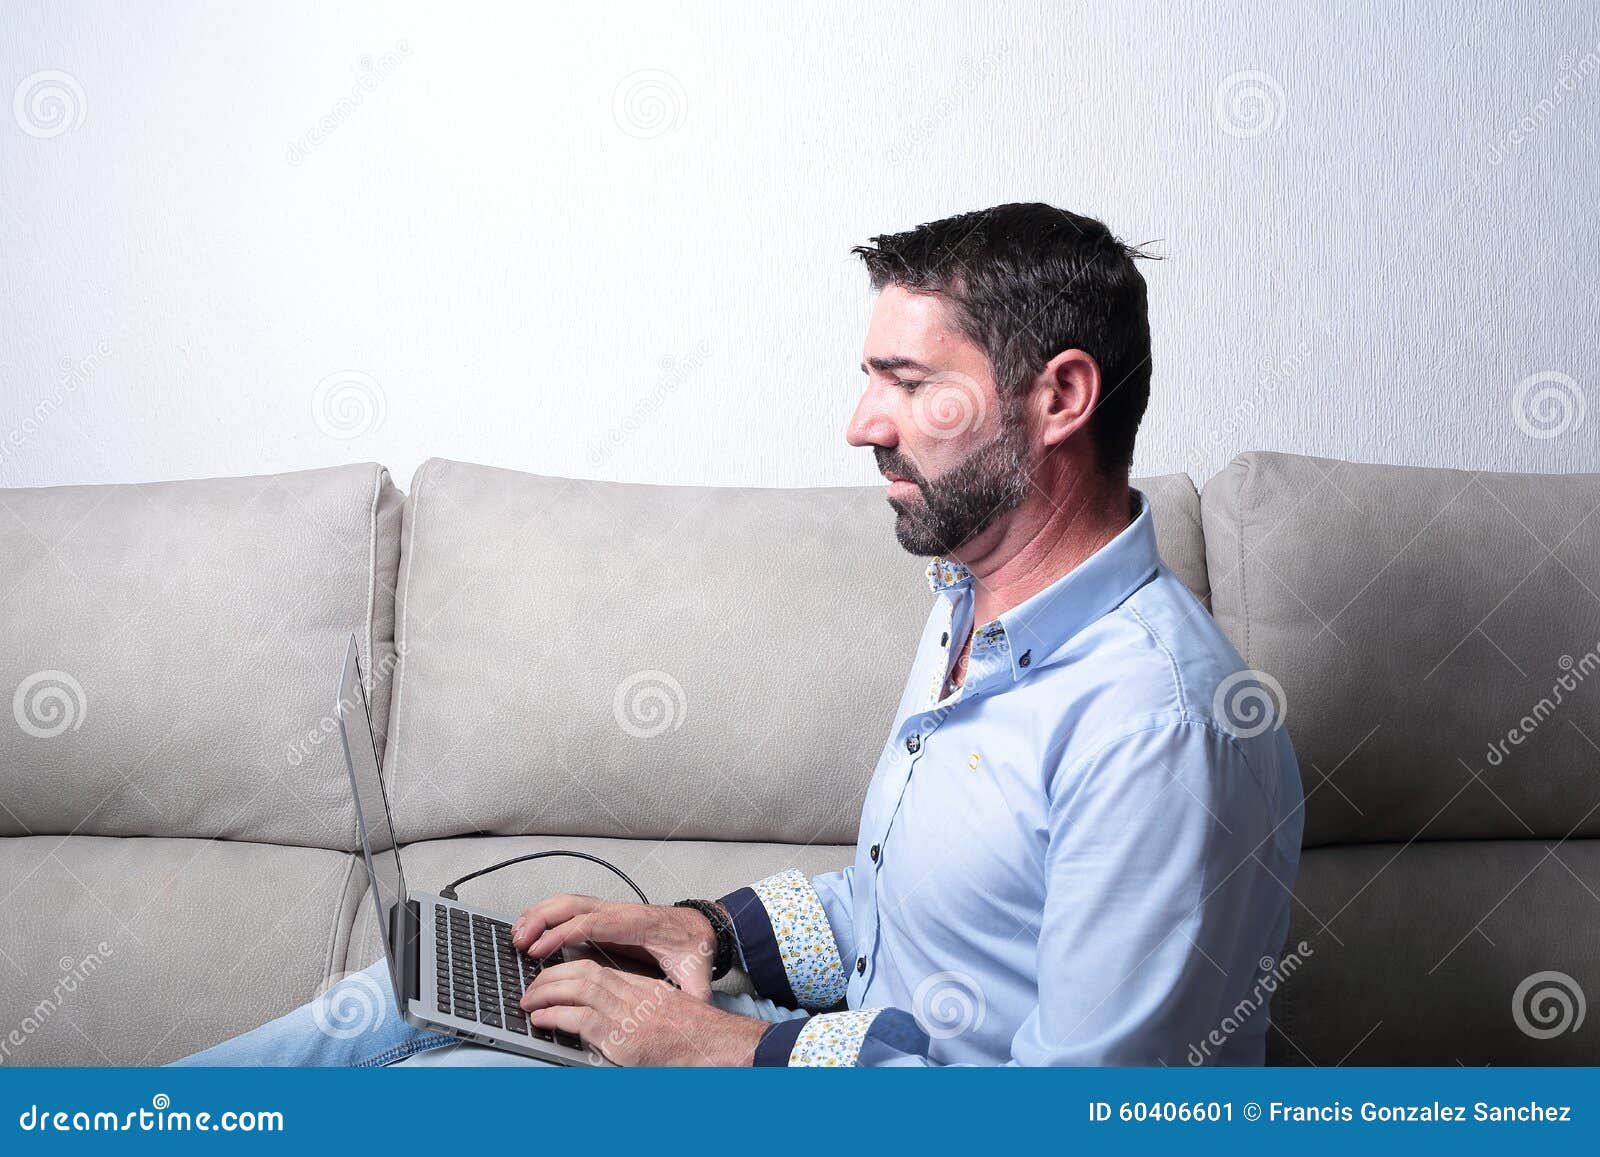 man with a computer